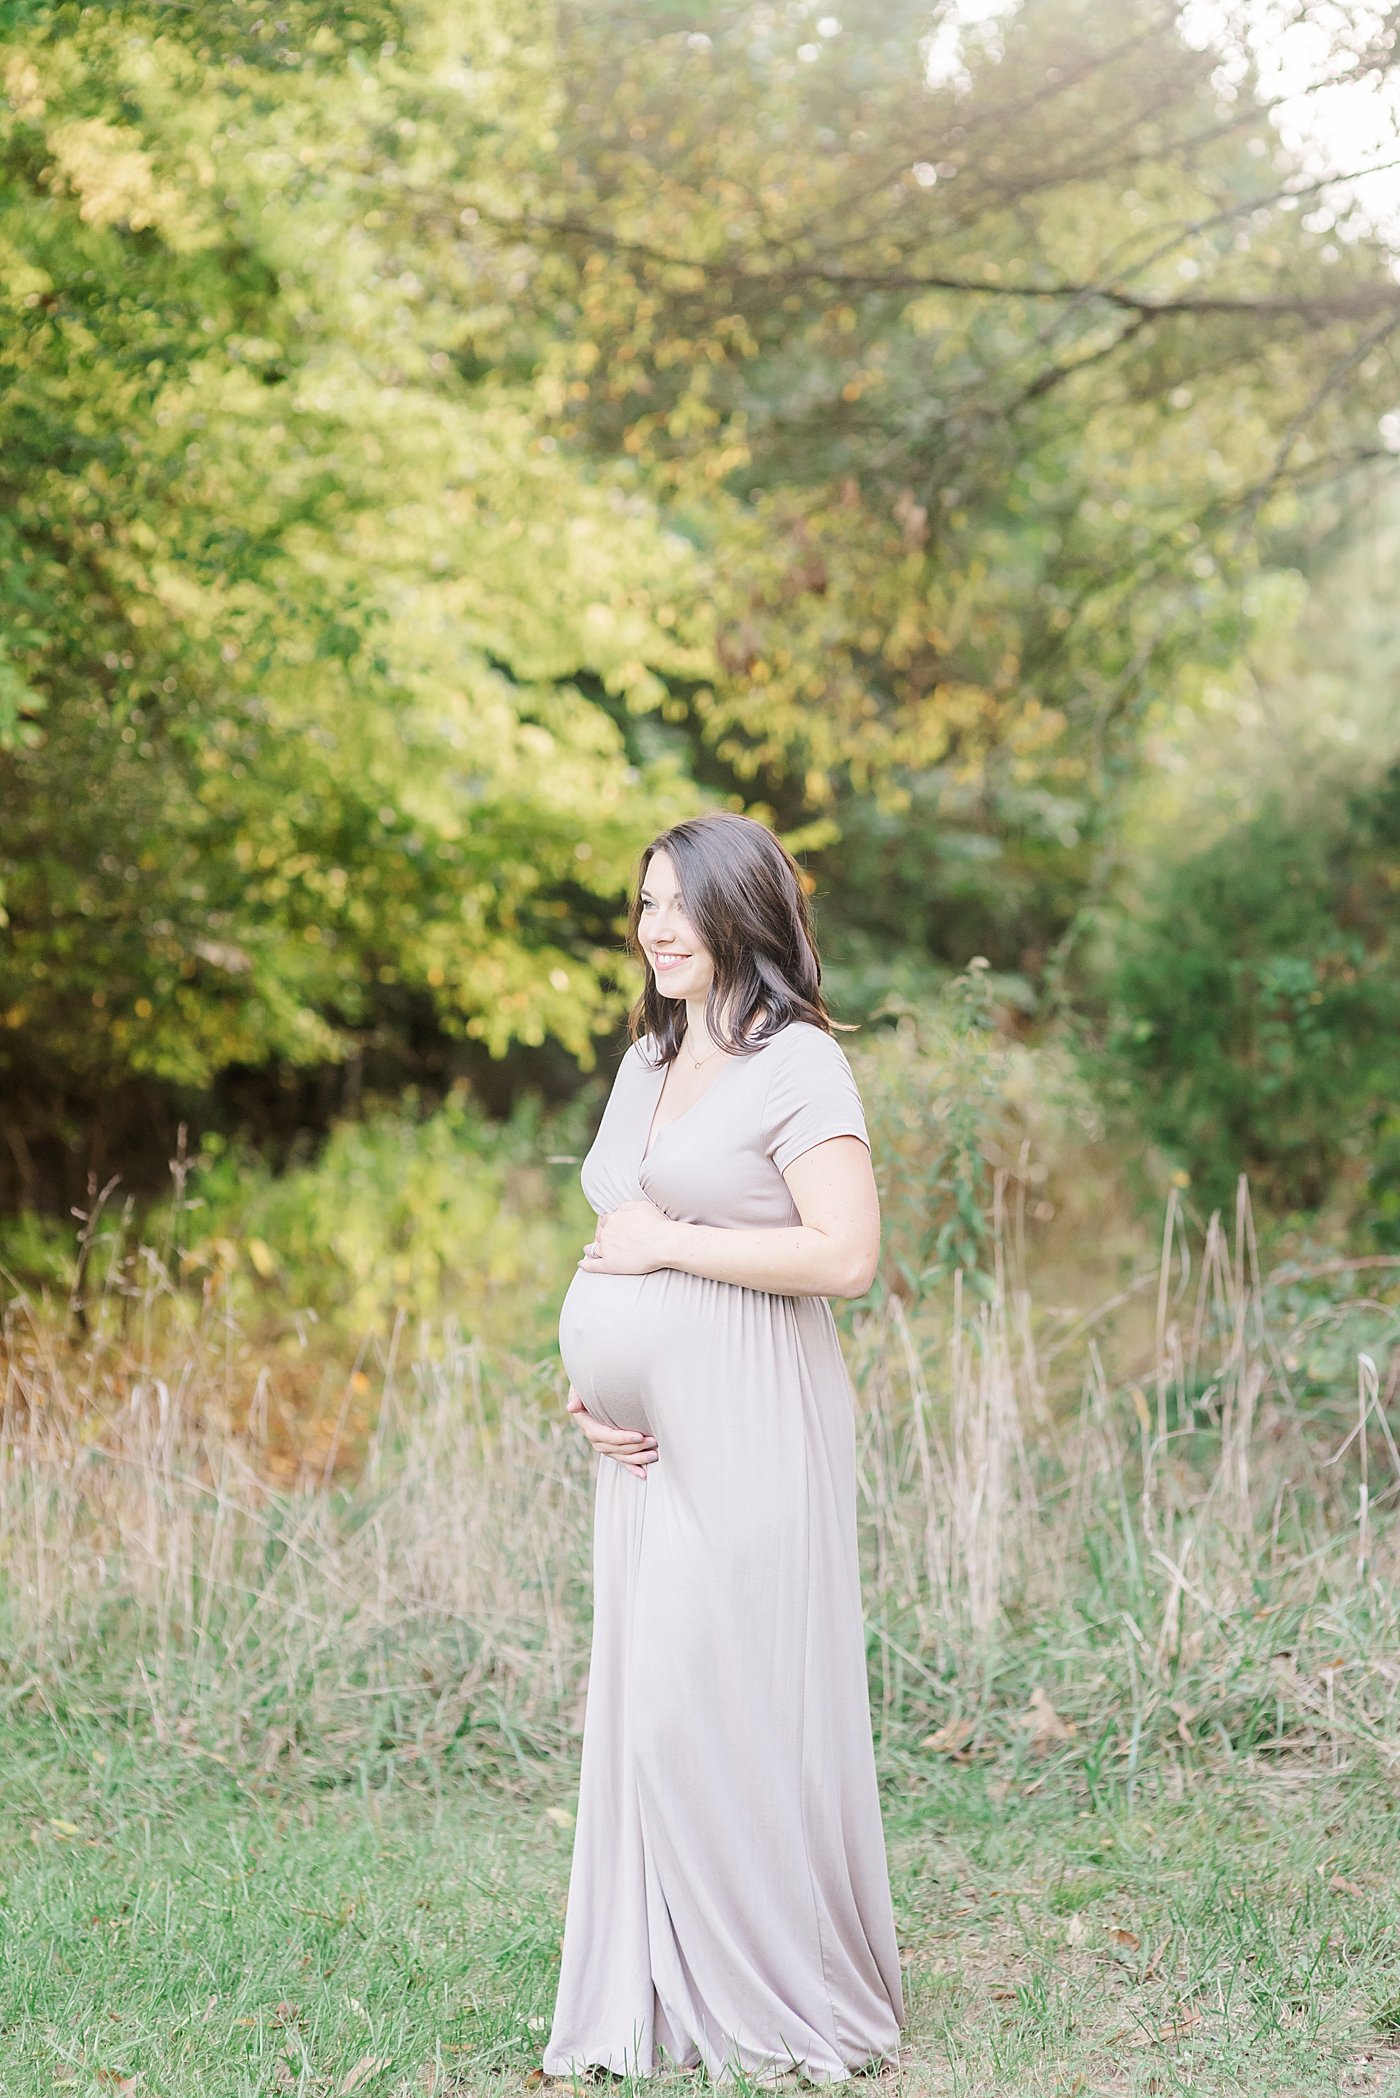 Mom to be in mauve dress smiling | Photo by Anna Wisjo